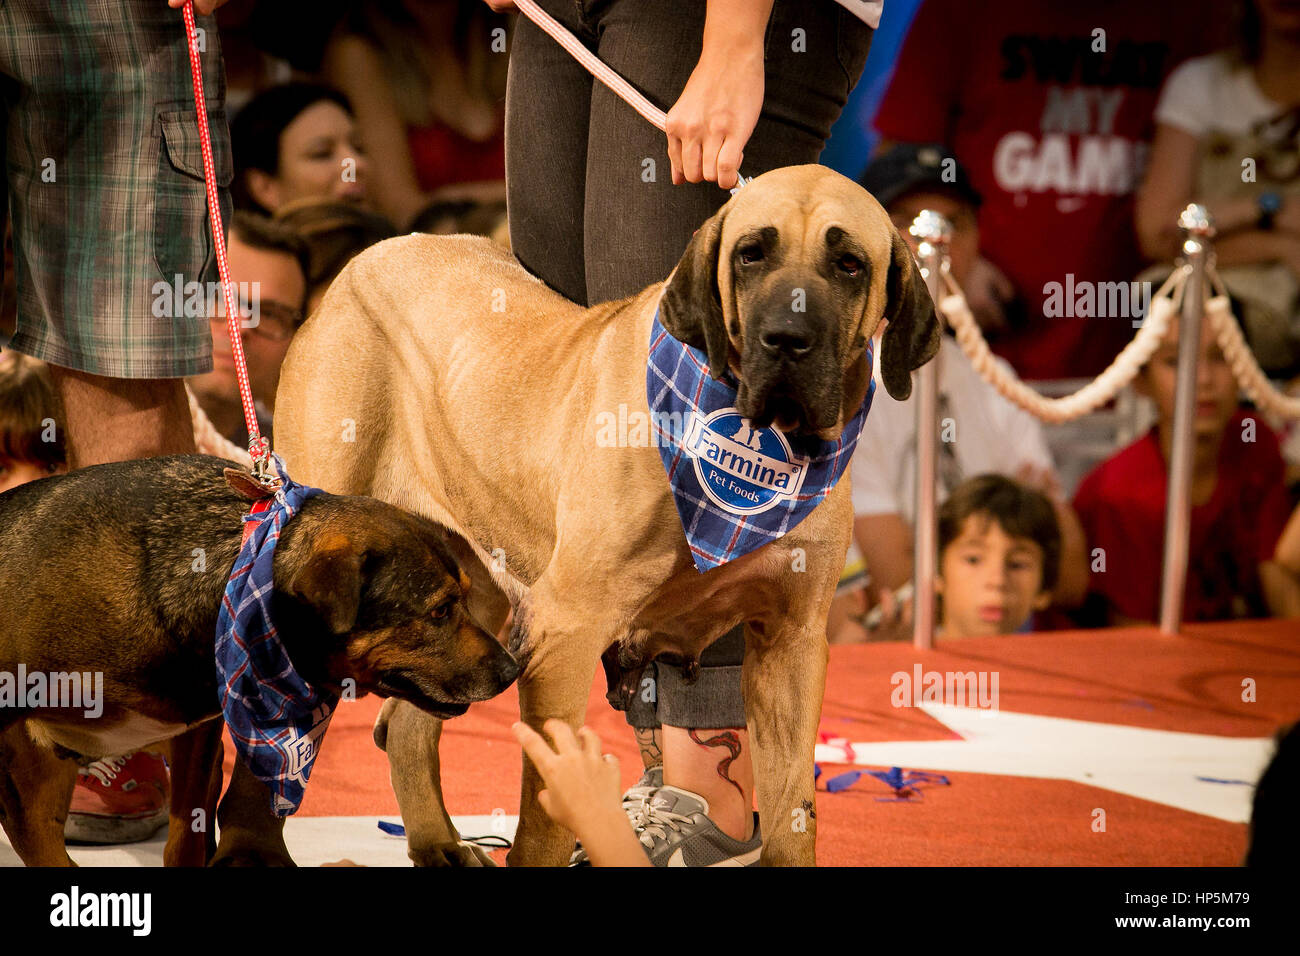 Sao Paulo, Brazil. 18th Feb, 2017. Hundreds of dogs (and their owners) participate in a costumes parade to promote the adoption of abandoned animals in the central square of a shopping mall in Sao Paulo Credit: Dario Oliveira/ZUMA Wire/Alamy Live News Stock Photo